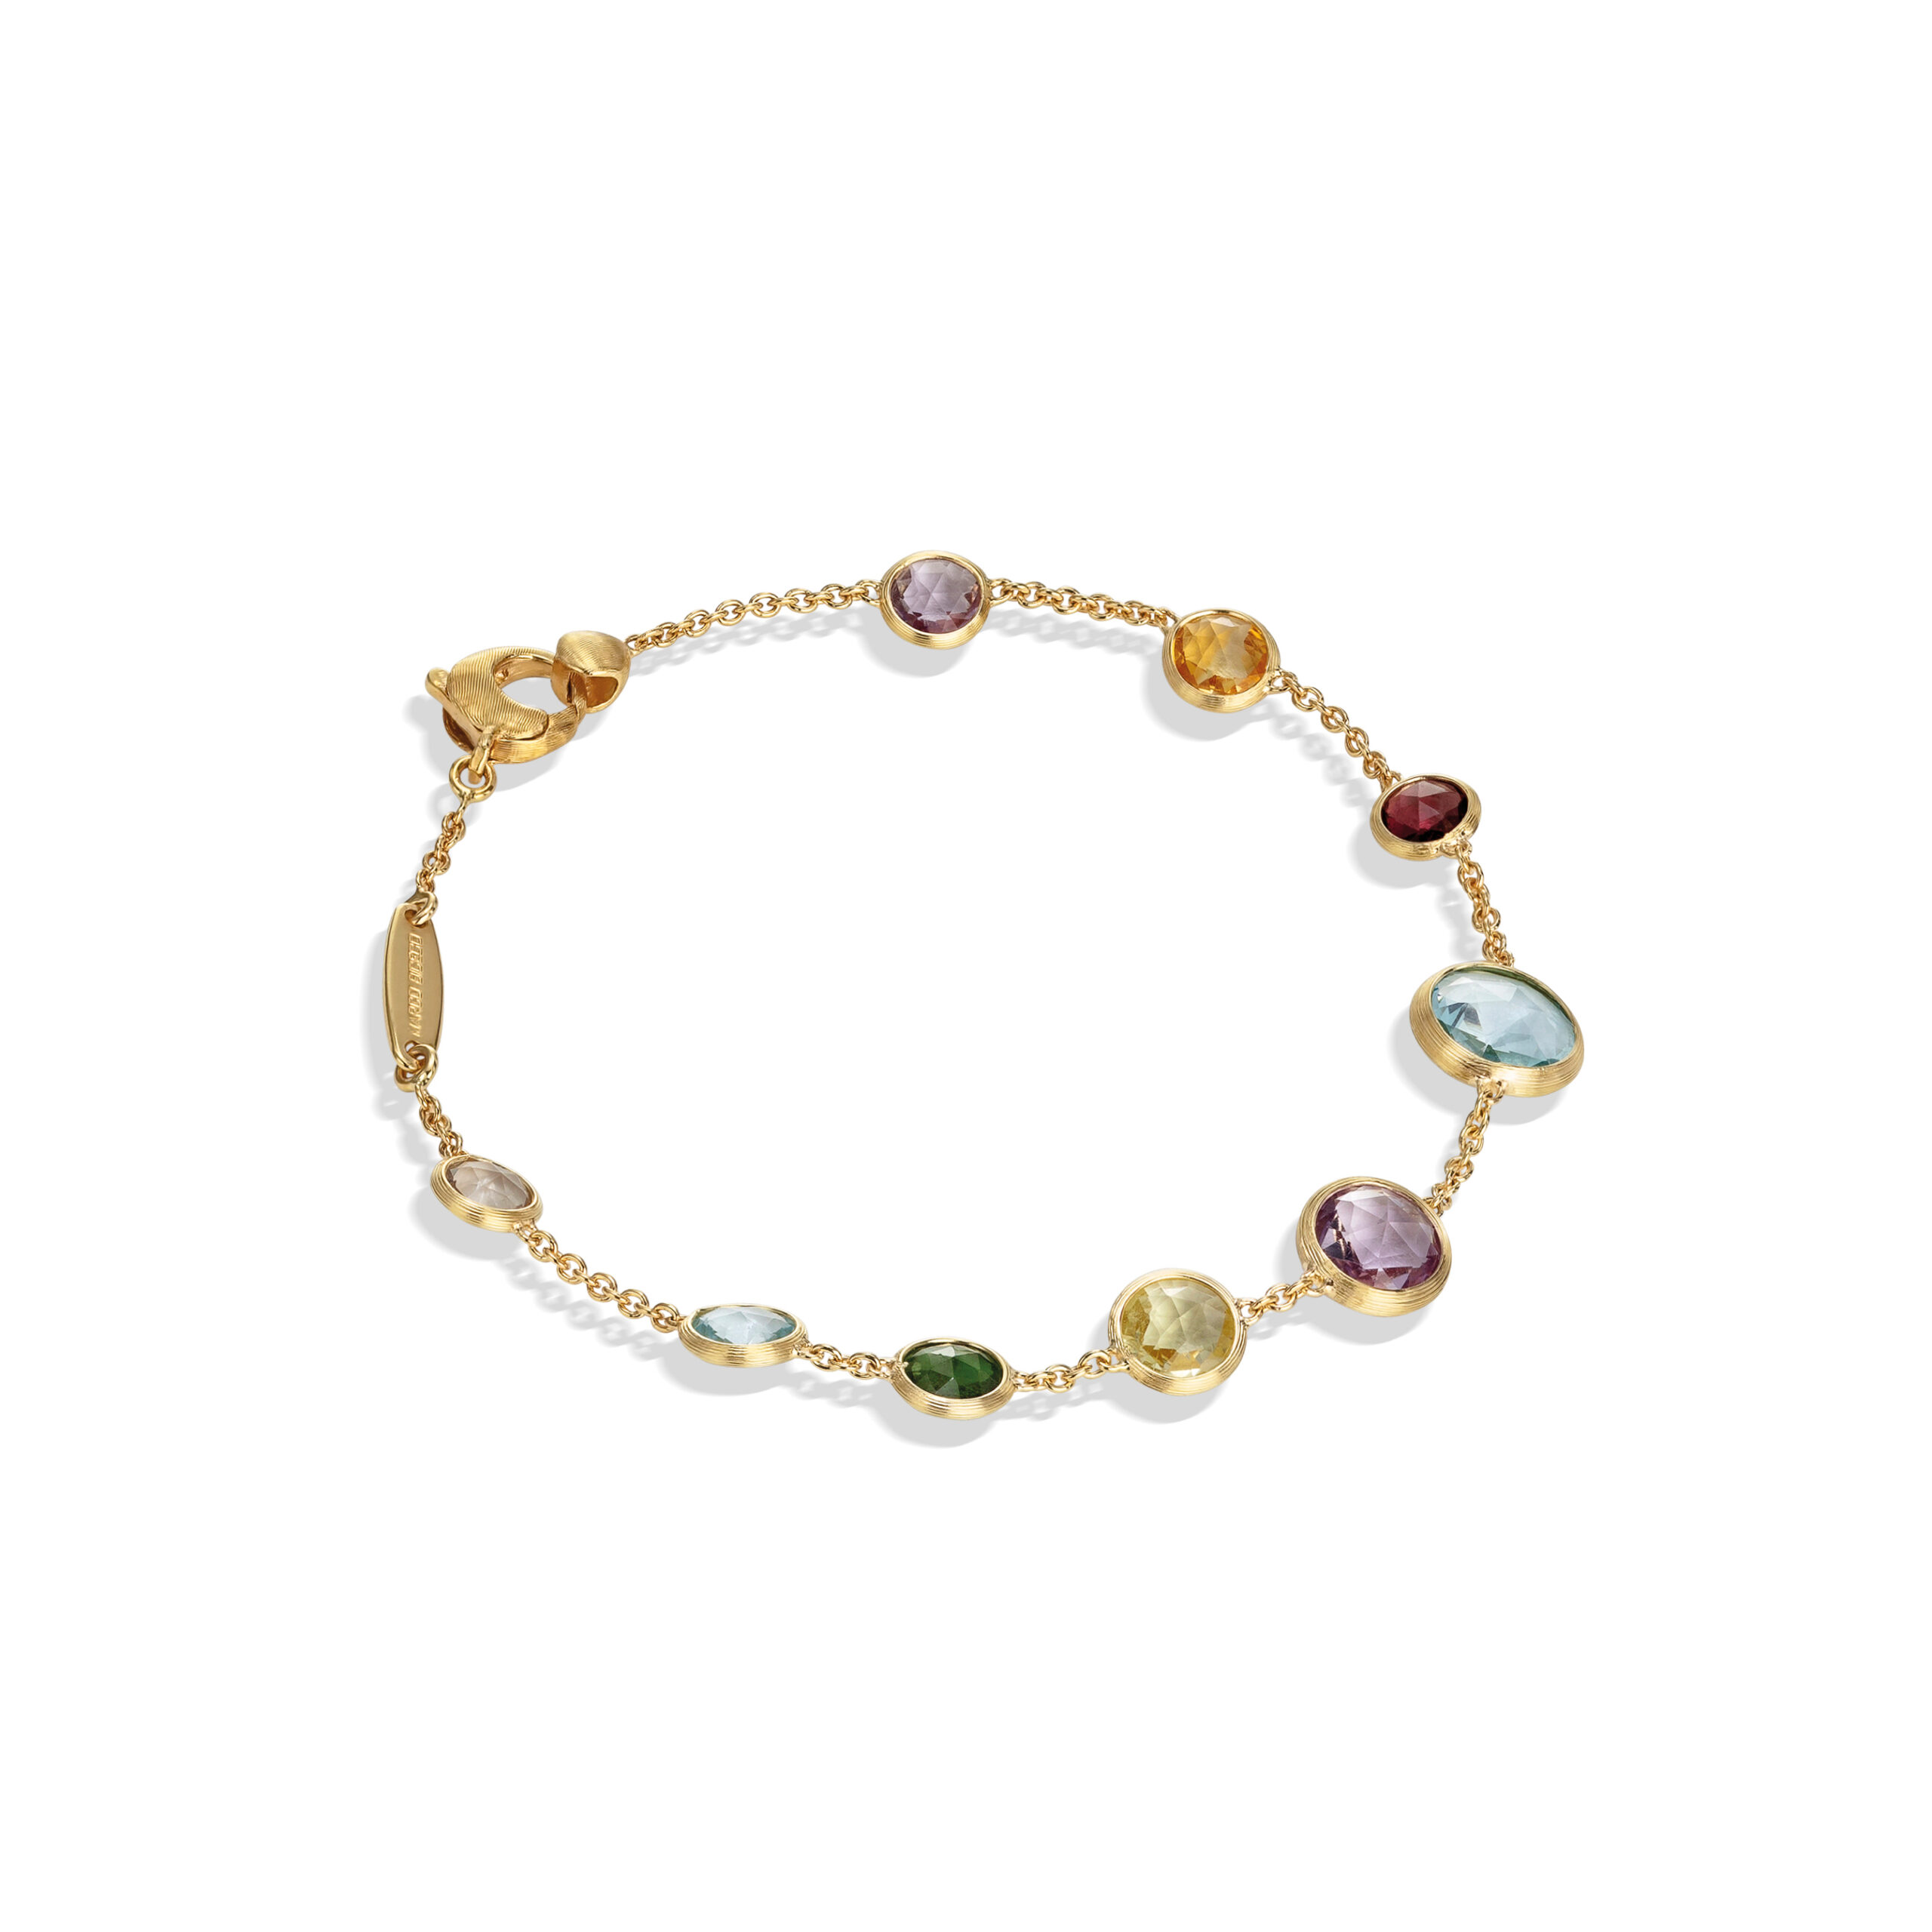 BB1304 MIX01 Y 02Marco Bicego Jaipur Color Collection 18k Yellow Gold Mixed Gemstone Single Strand Bracelet